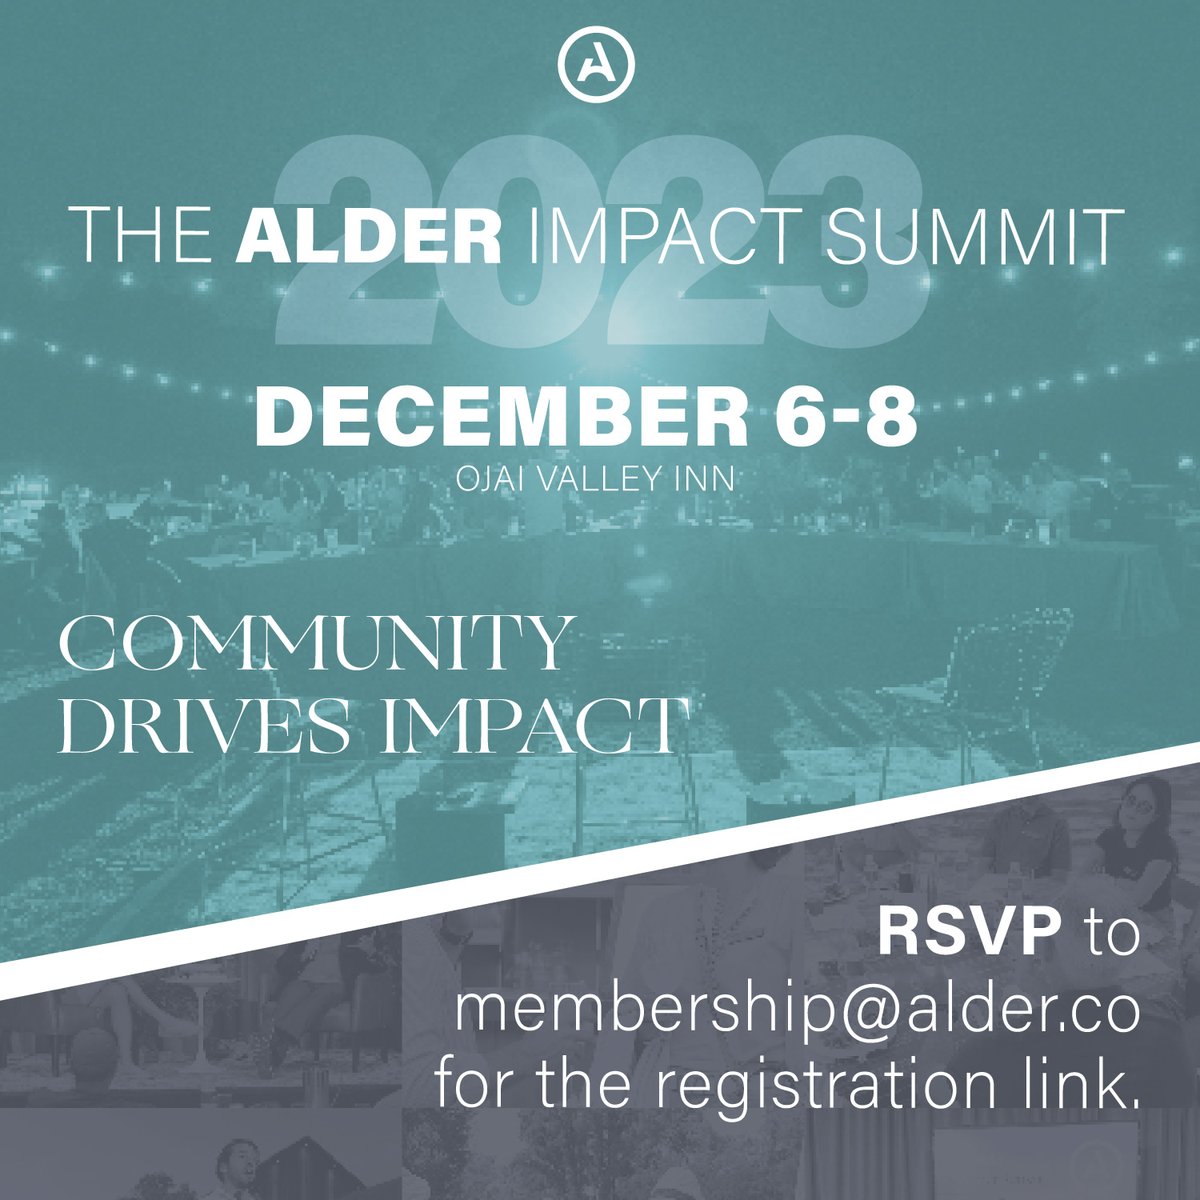 Connect with Members from across the country. Immerse in perspective-shifting content and activities. Impact starts from within and shapes the world. Only at the Alder Impact Summit. Join us December 6-8, 2023 at Ojai Valley Inn. RSVP to membership@alder.co for registration link.